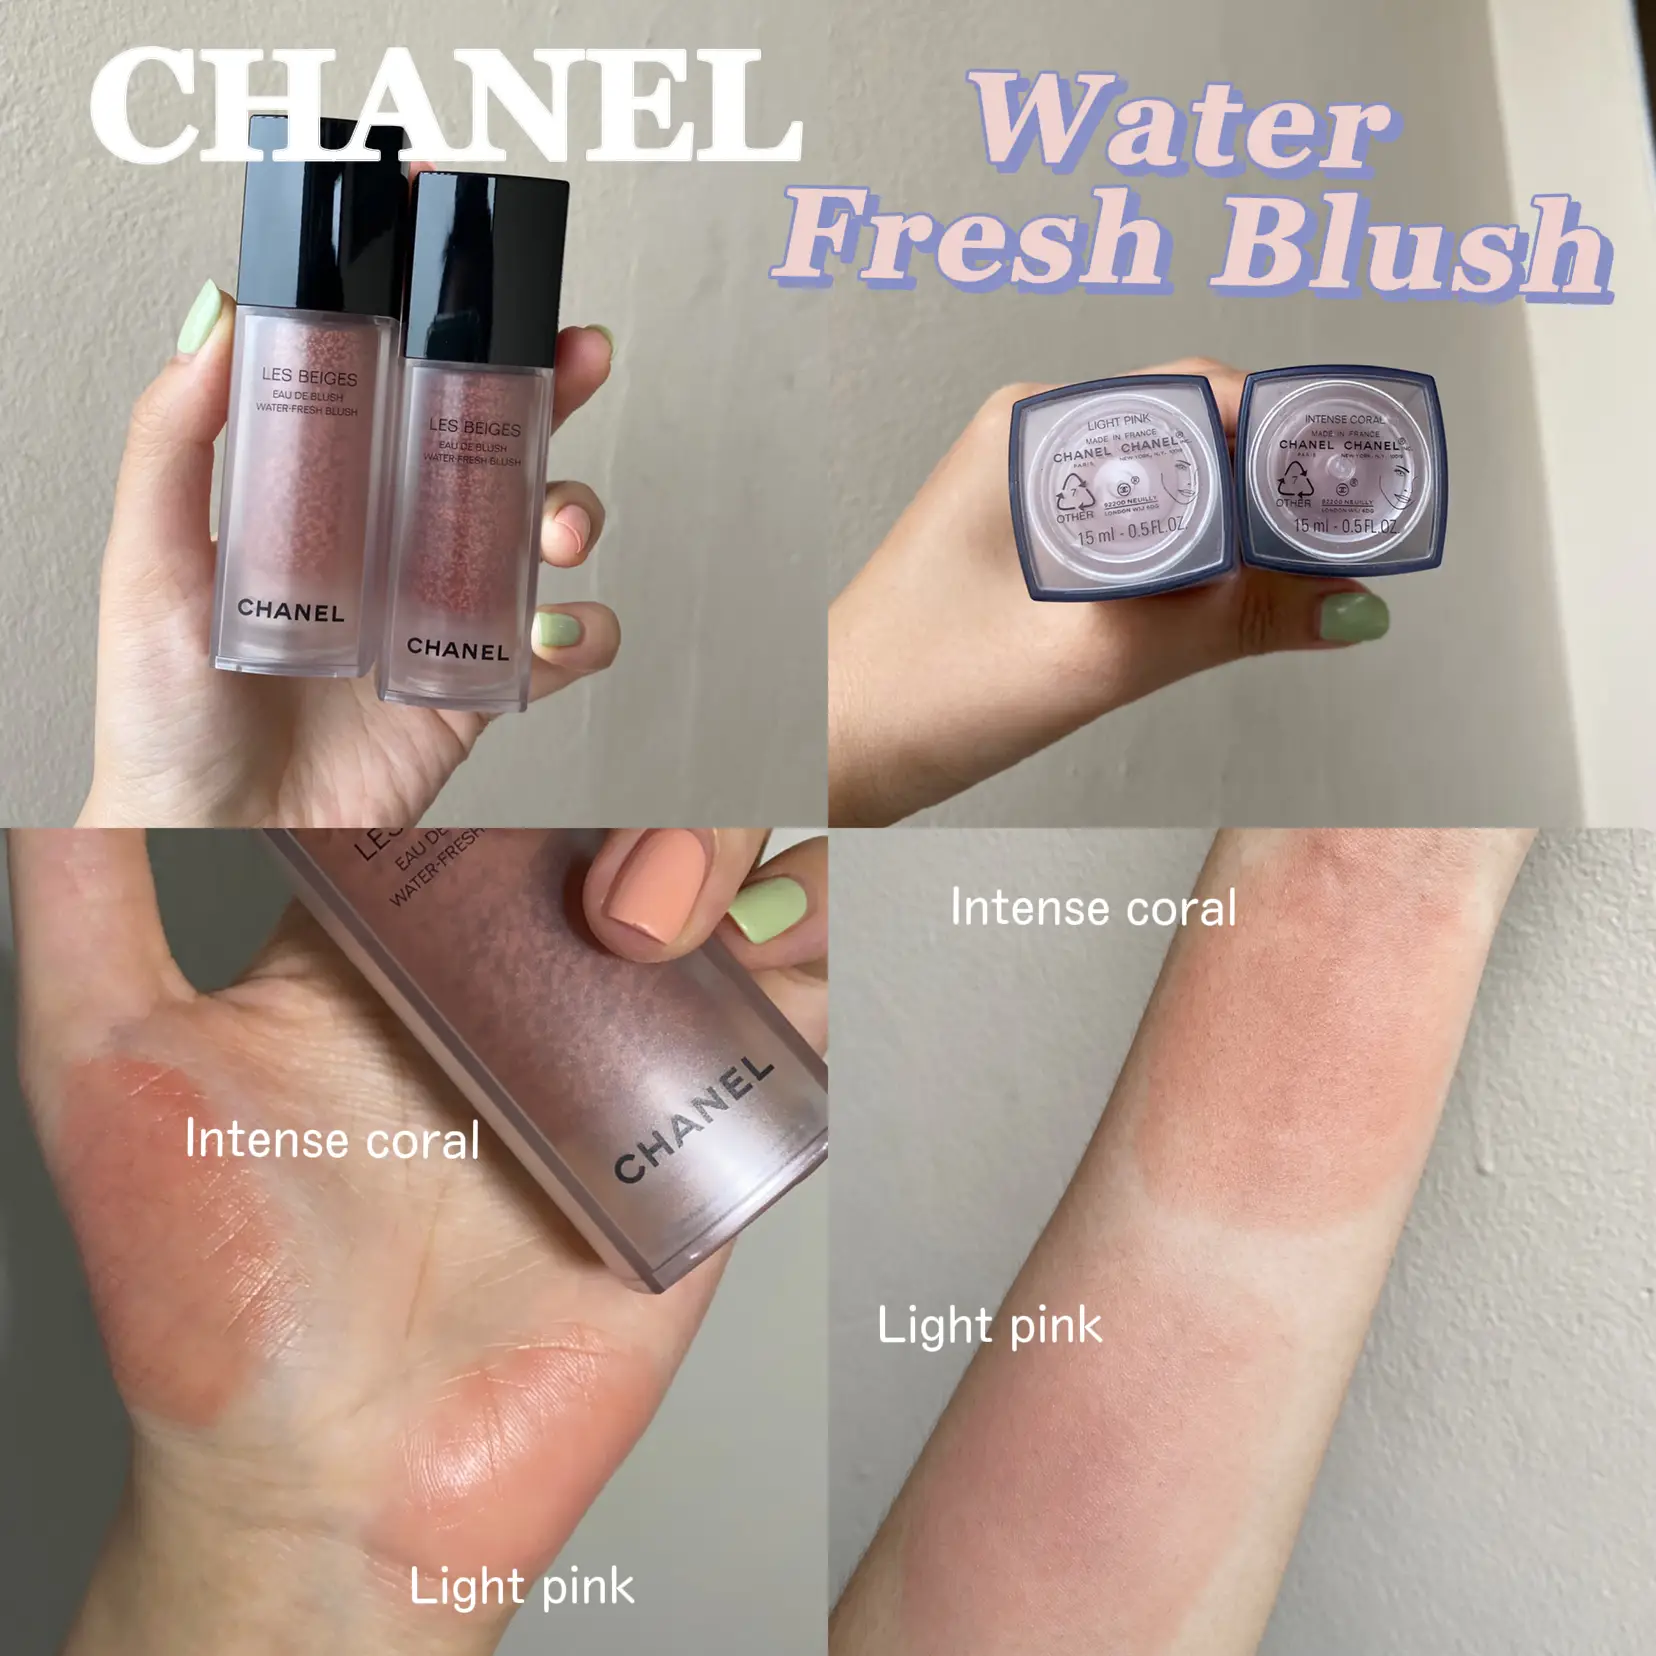 Chanel water fresh blush & Trips how to apply💖